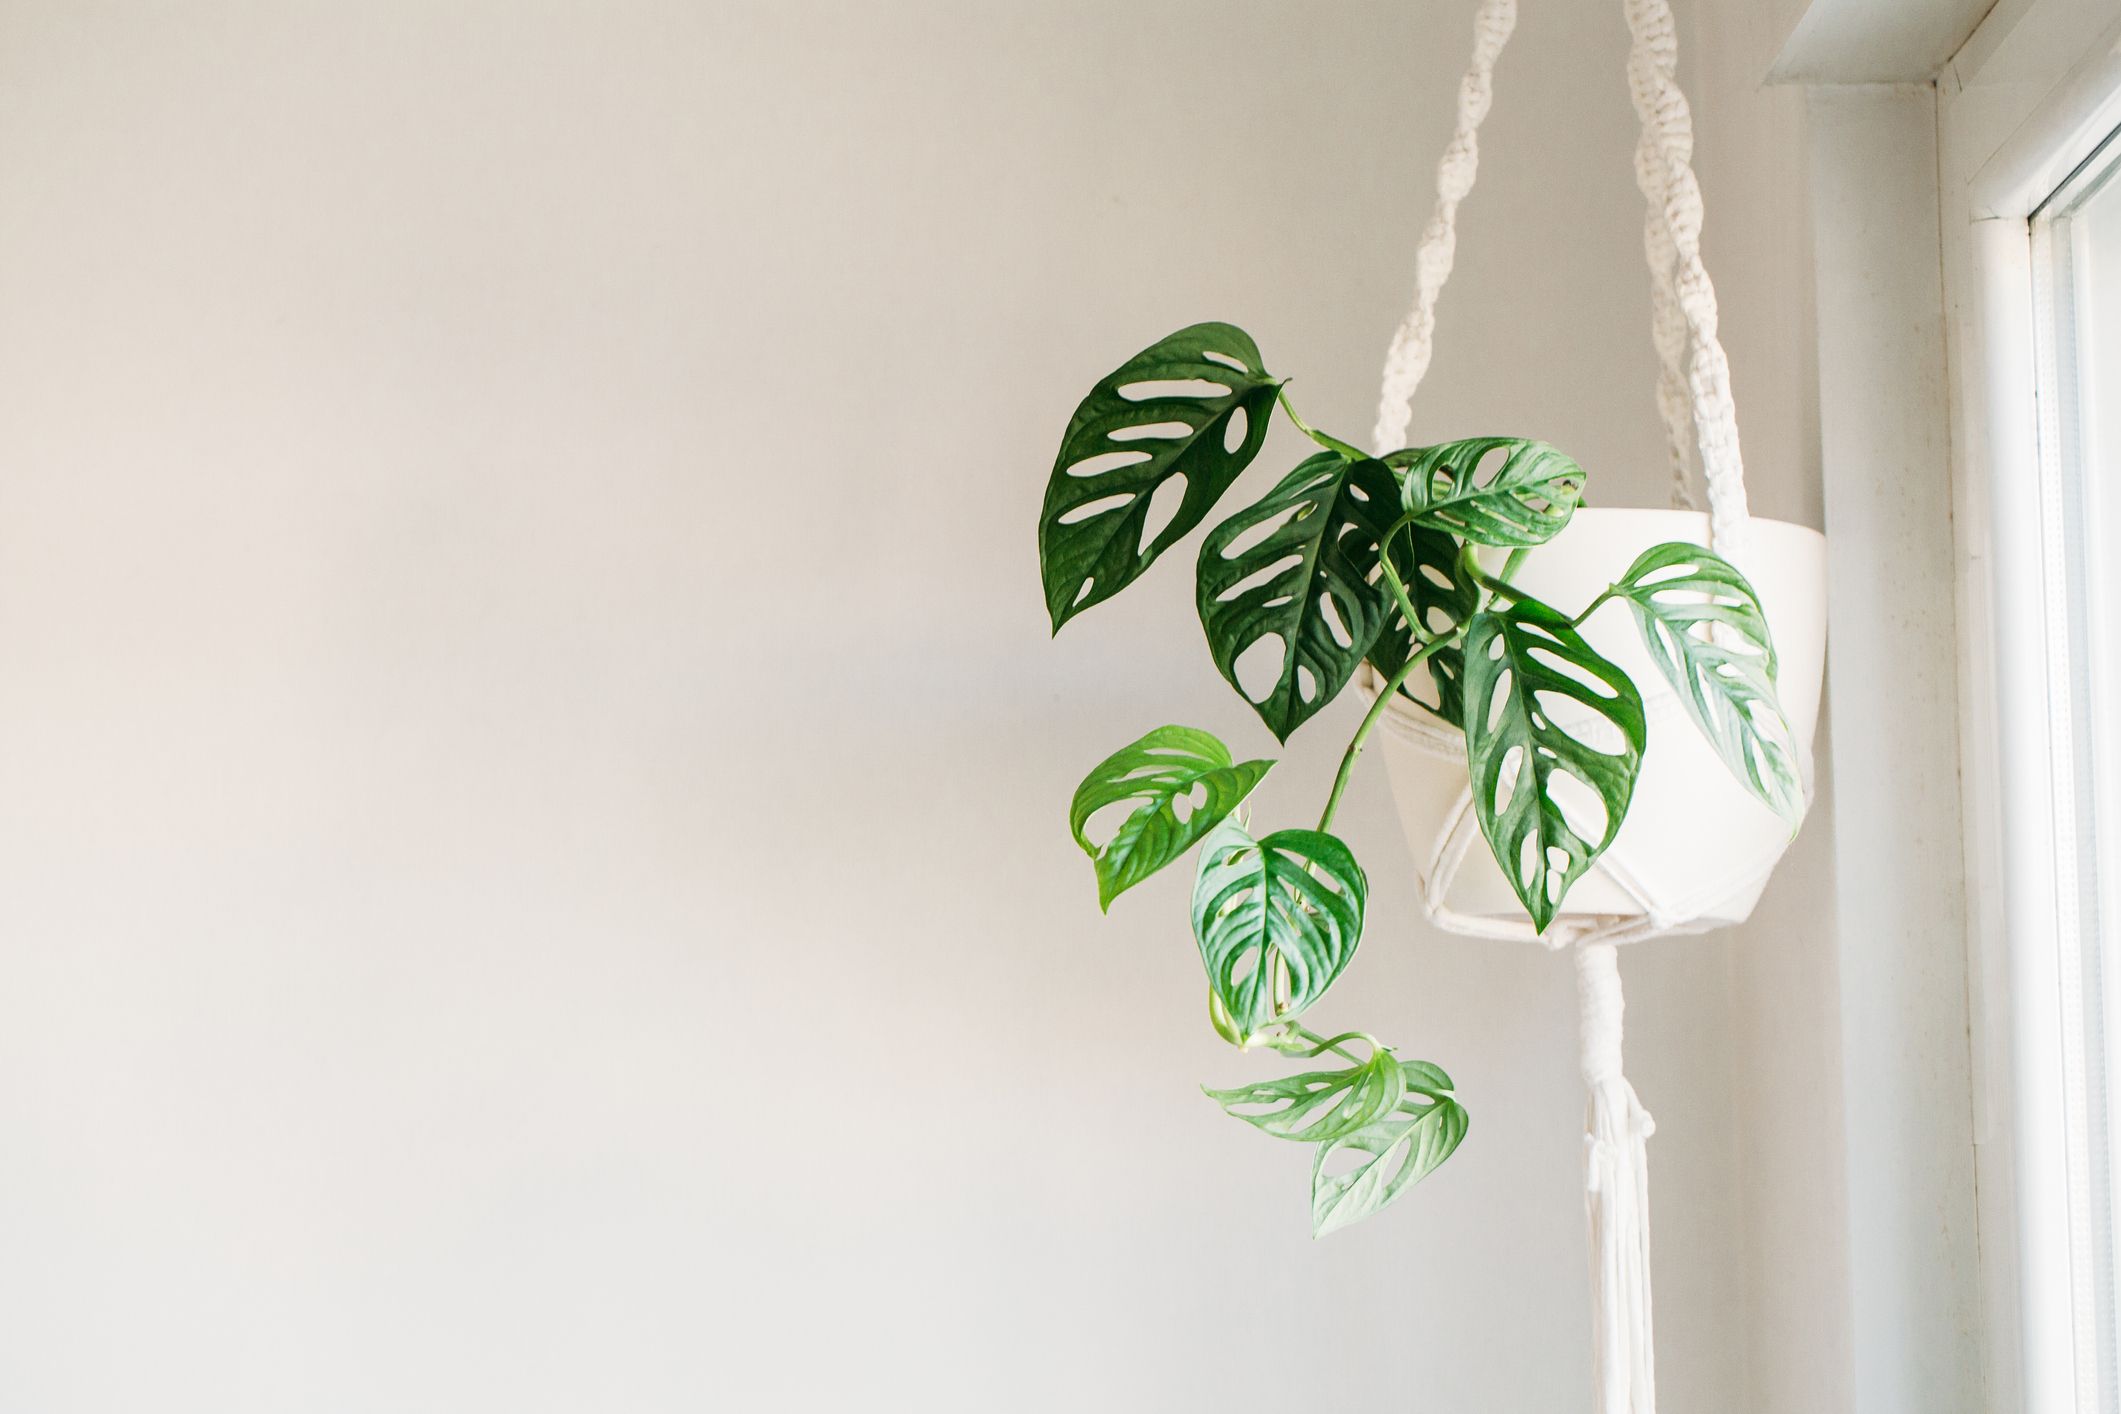 Utilize Corner Space with Hanging Plants